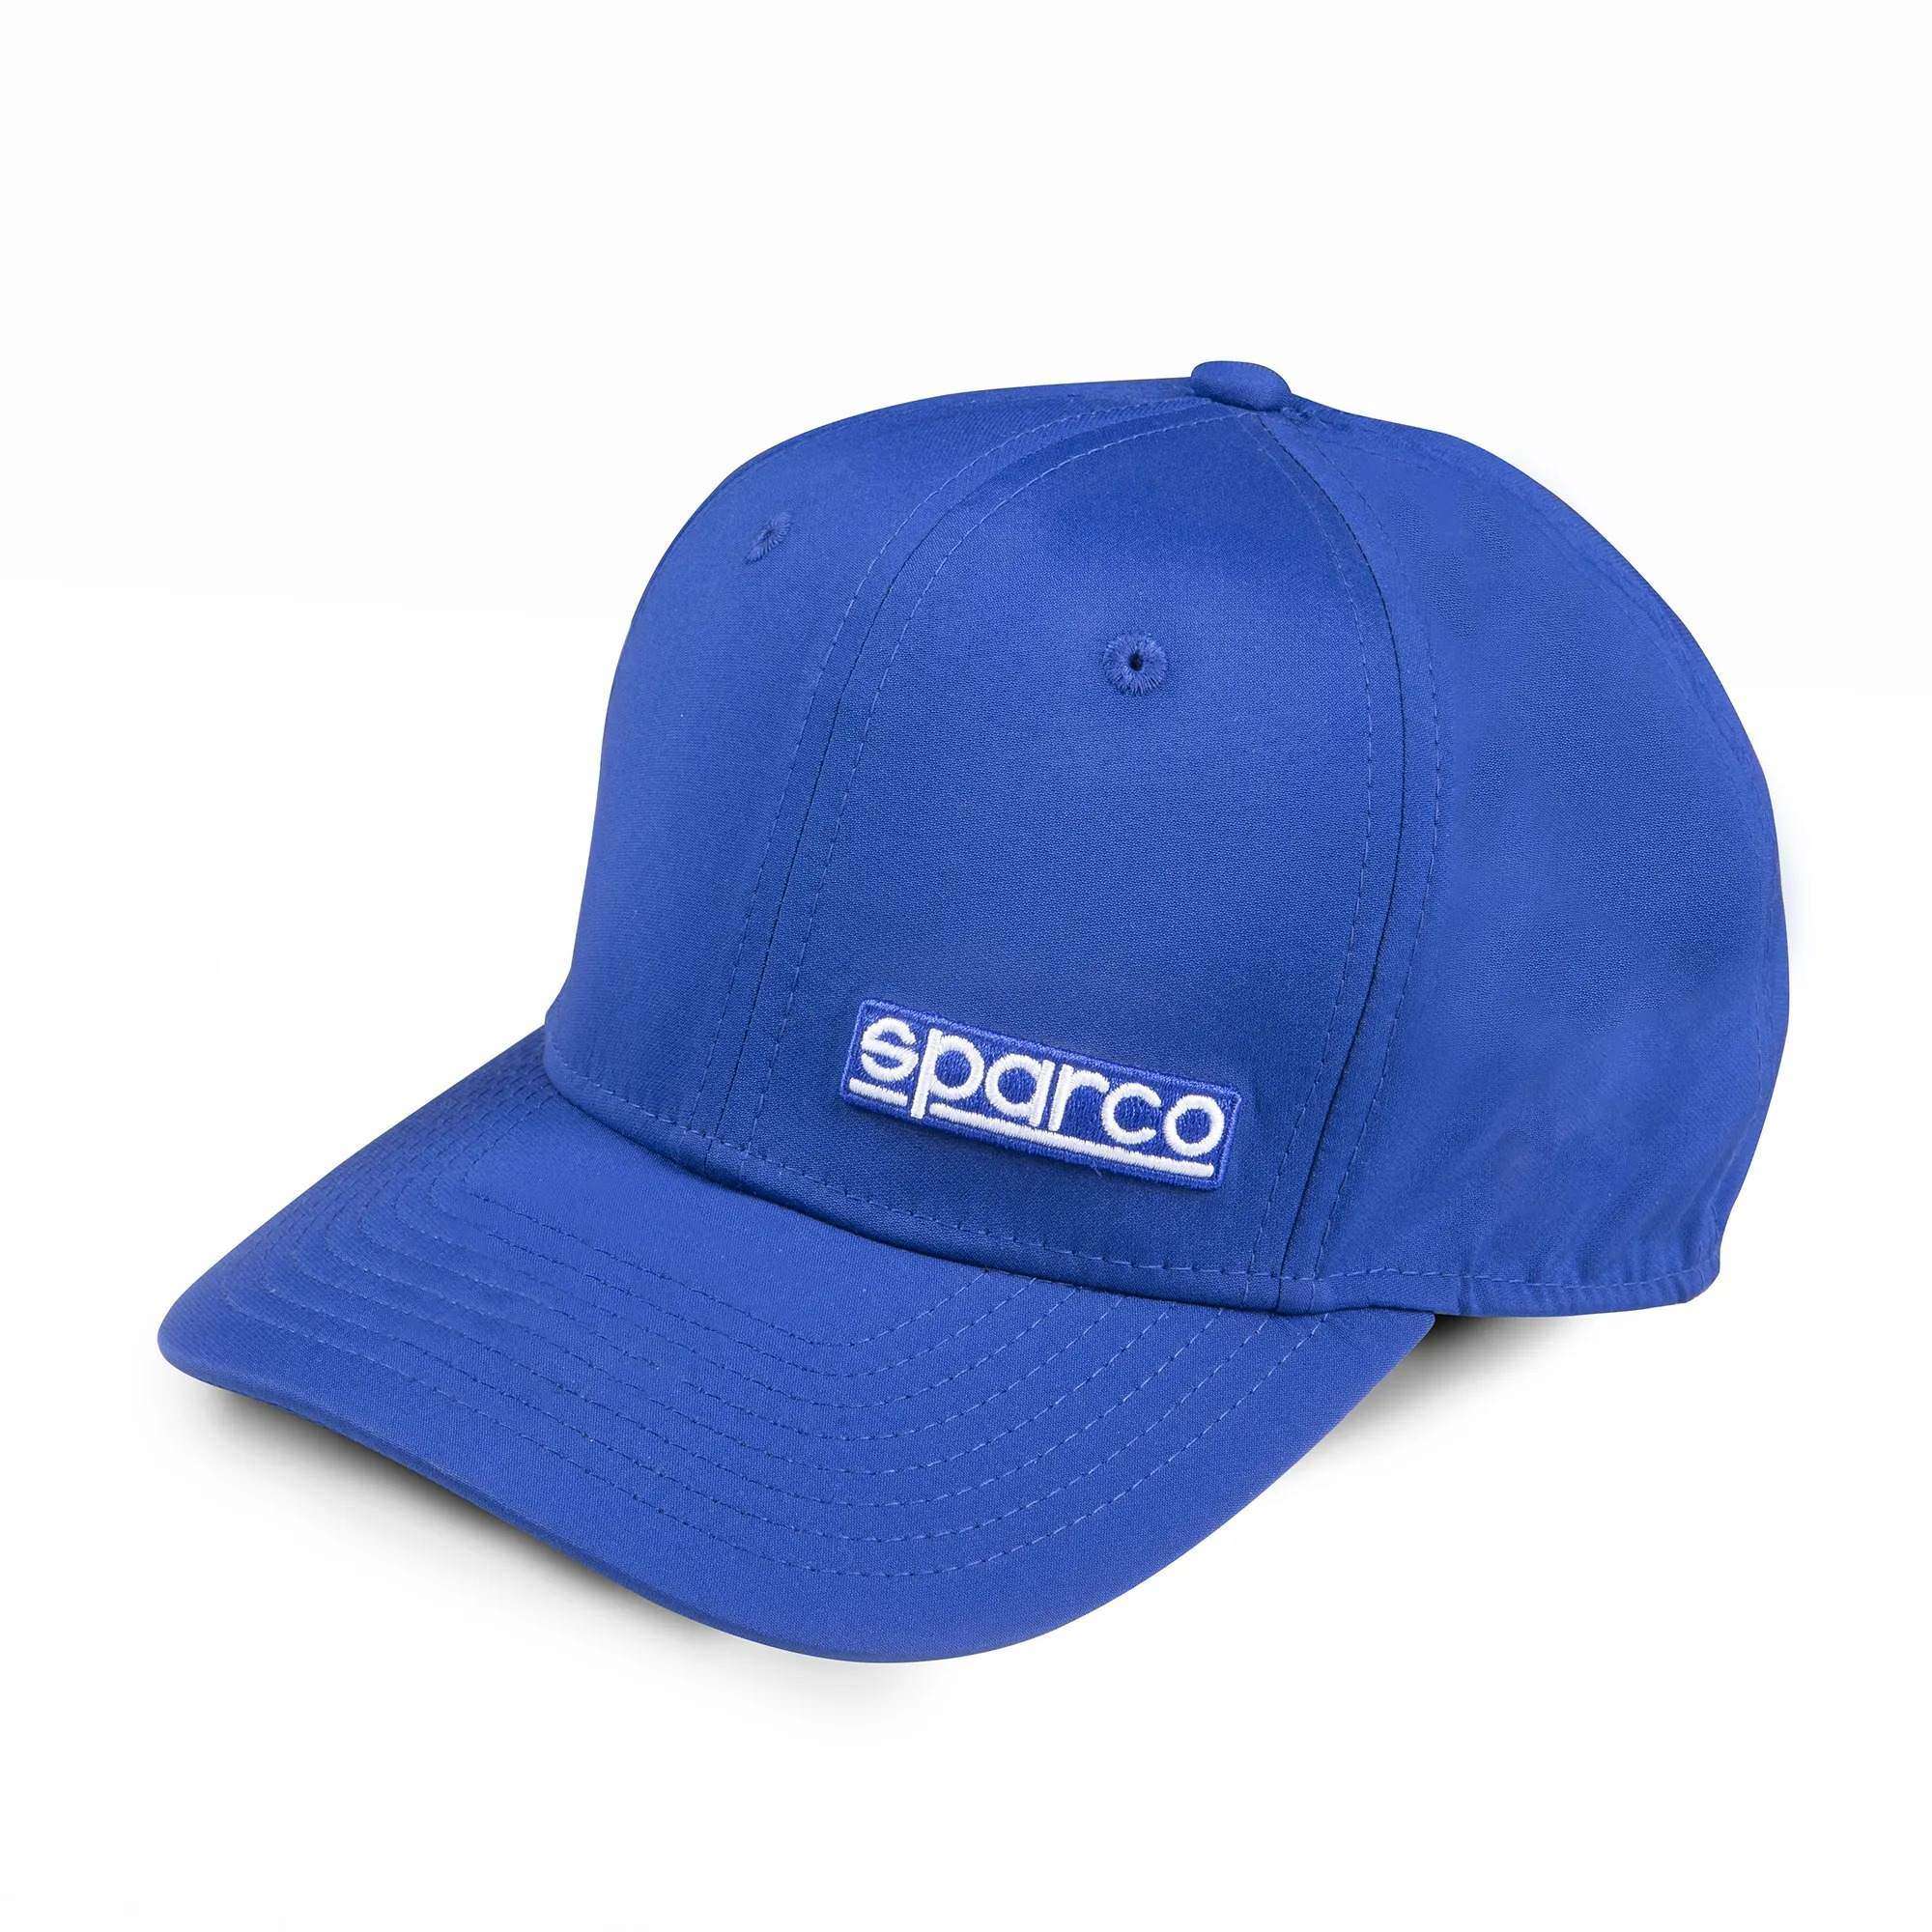 CAP YOUTH CORPORATE - Sparco Shop